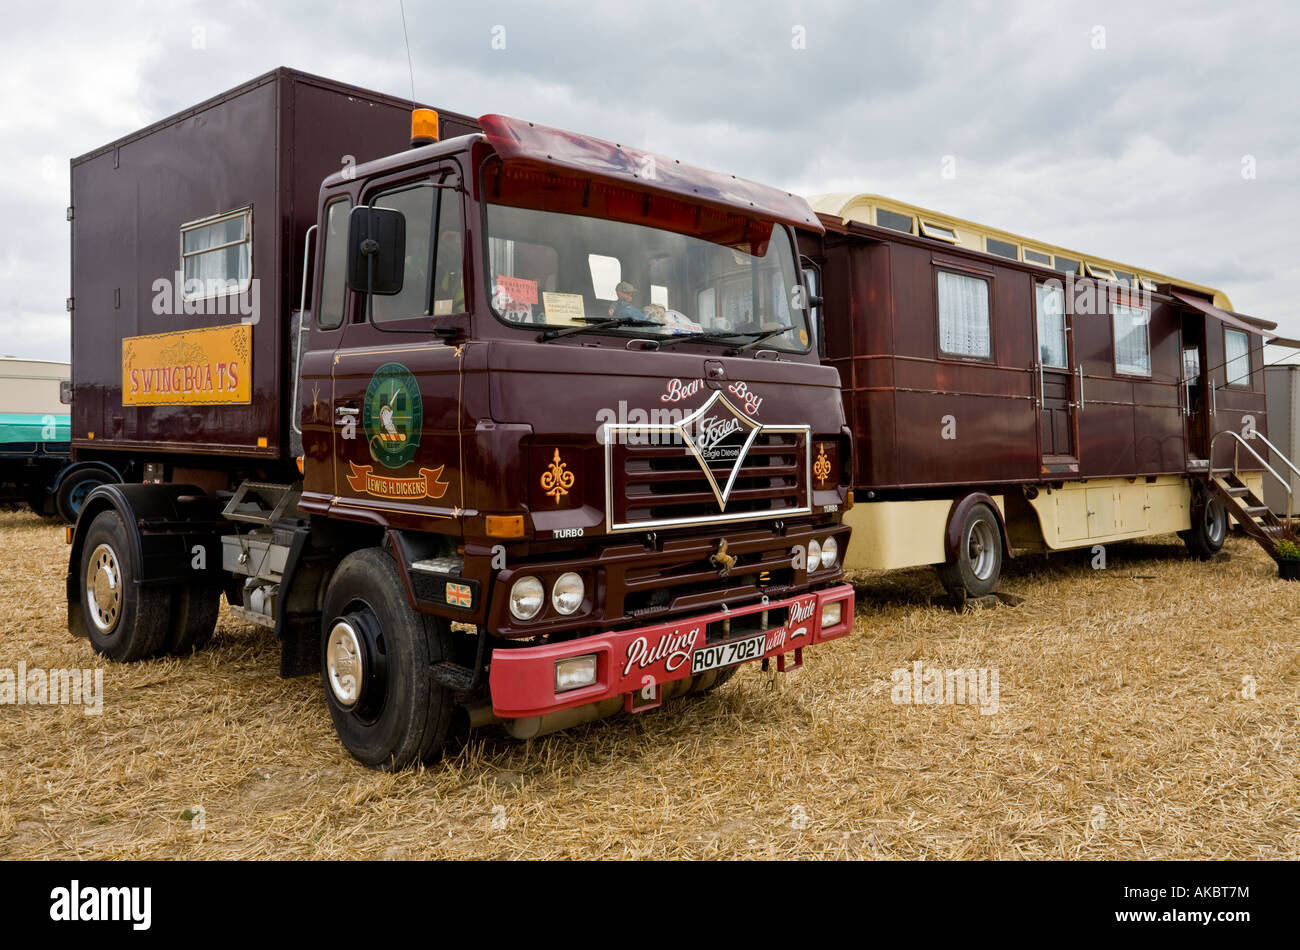 1982 Foden Fleetmaster Tractor Unit, Reg No. ROV 702Y, with living van trailer, at the Great Dorset Steam Fair, England, UK. Stock Photo